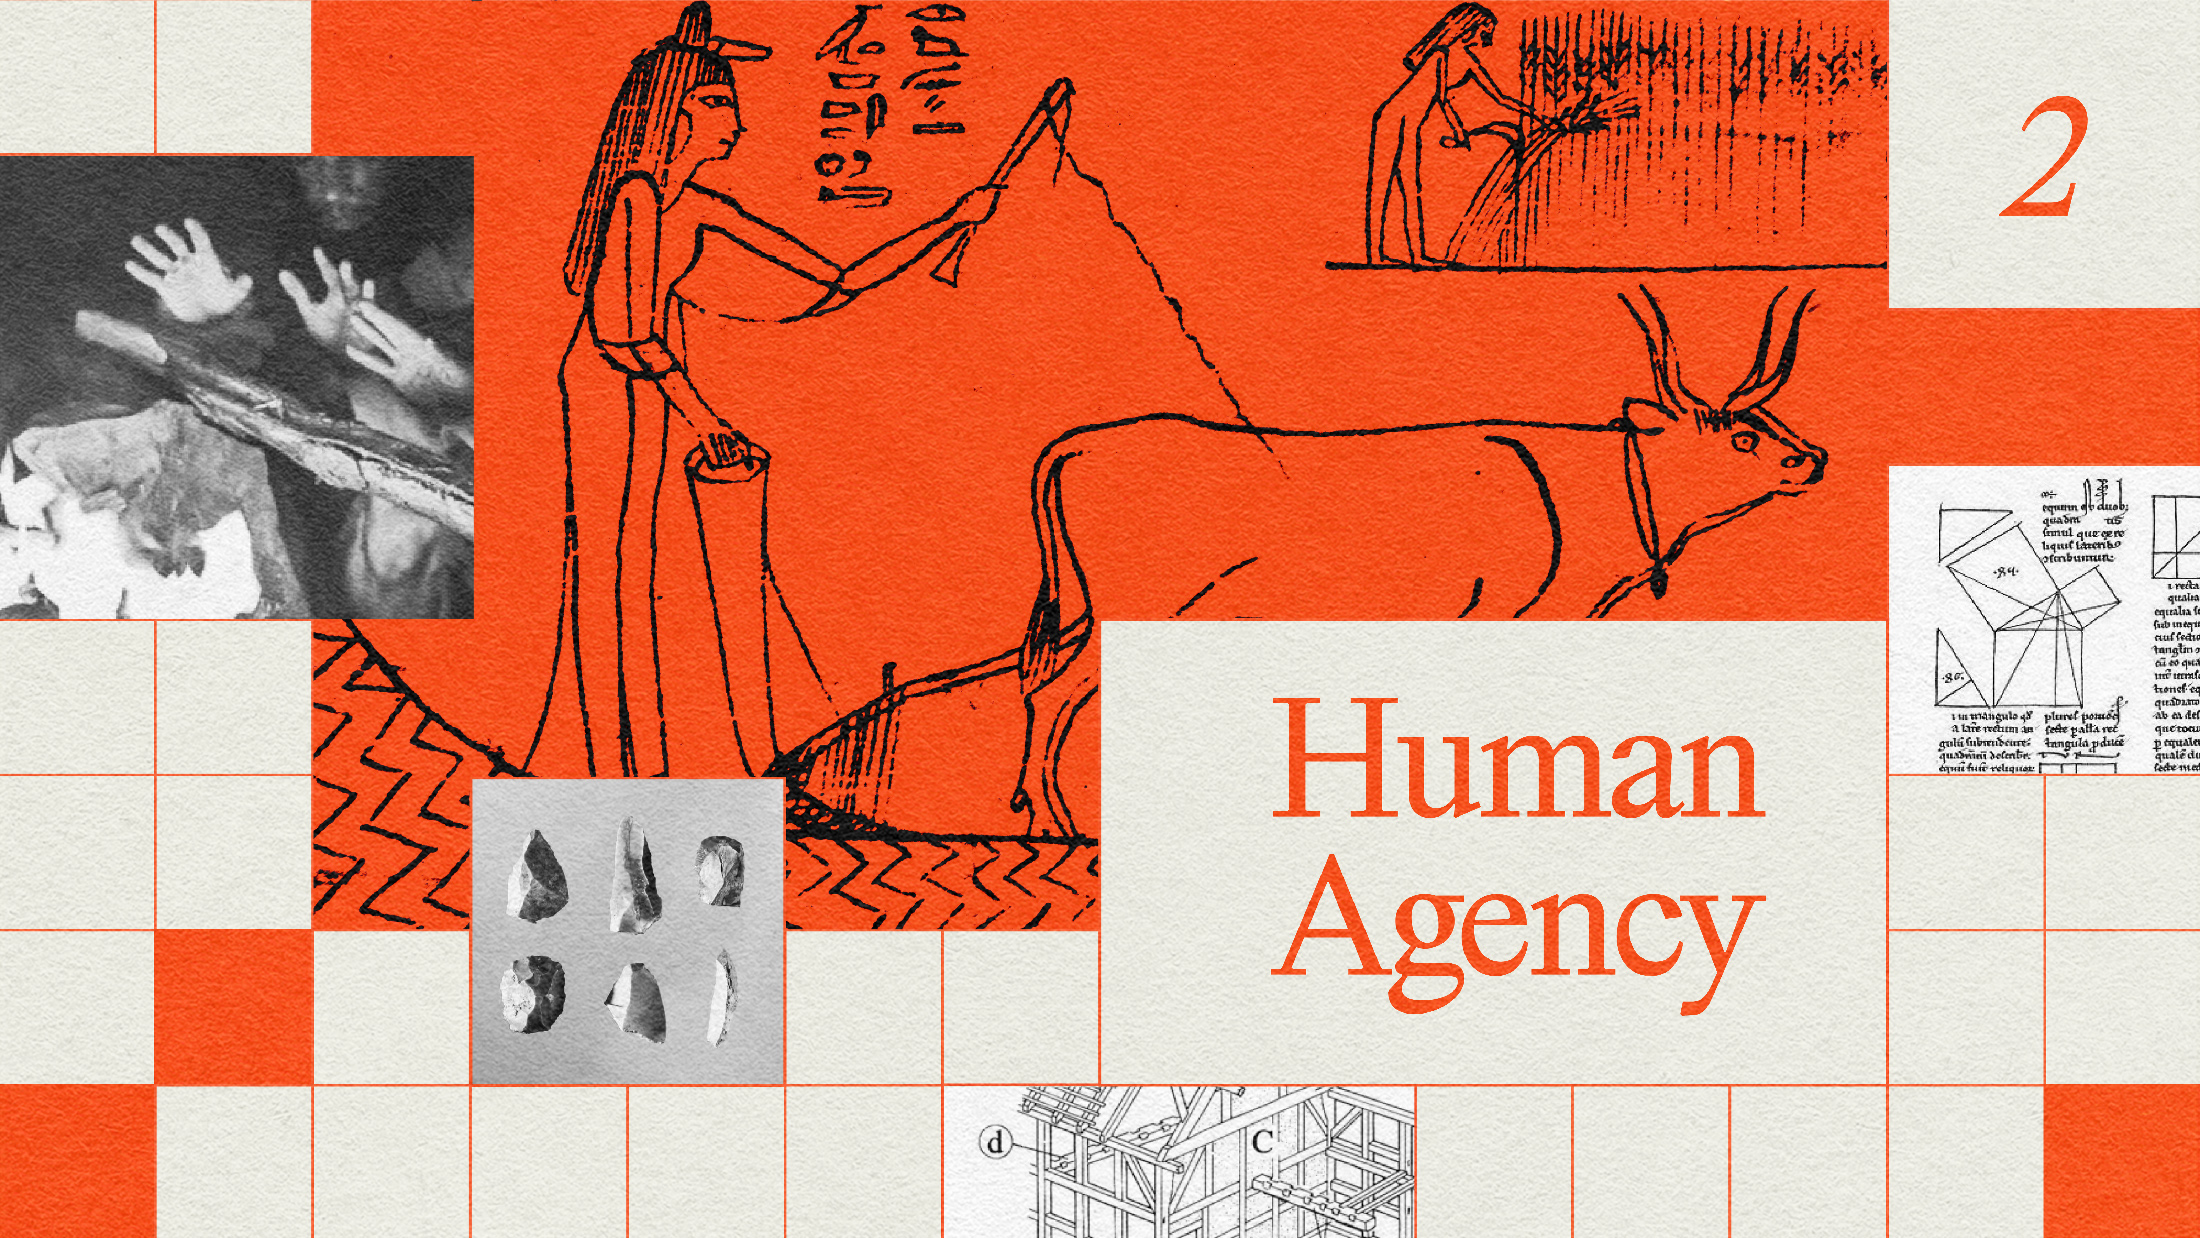 A collage featuring ancient Egyptian art, handprints, geometric sketches, and prehistoric tools, alongside the text "Human Agency" and the number "2" in the top right corner on an orange and white grid background.